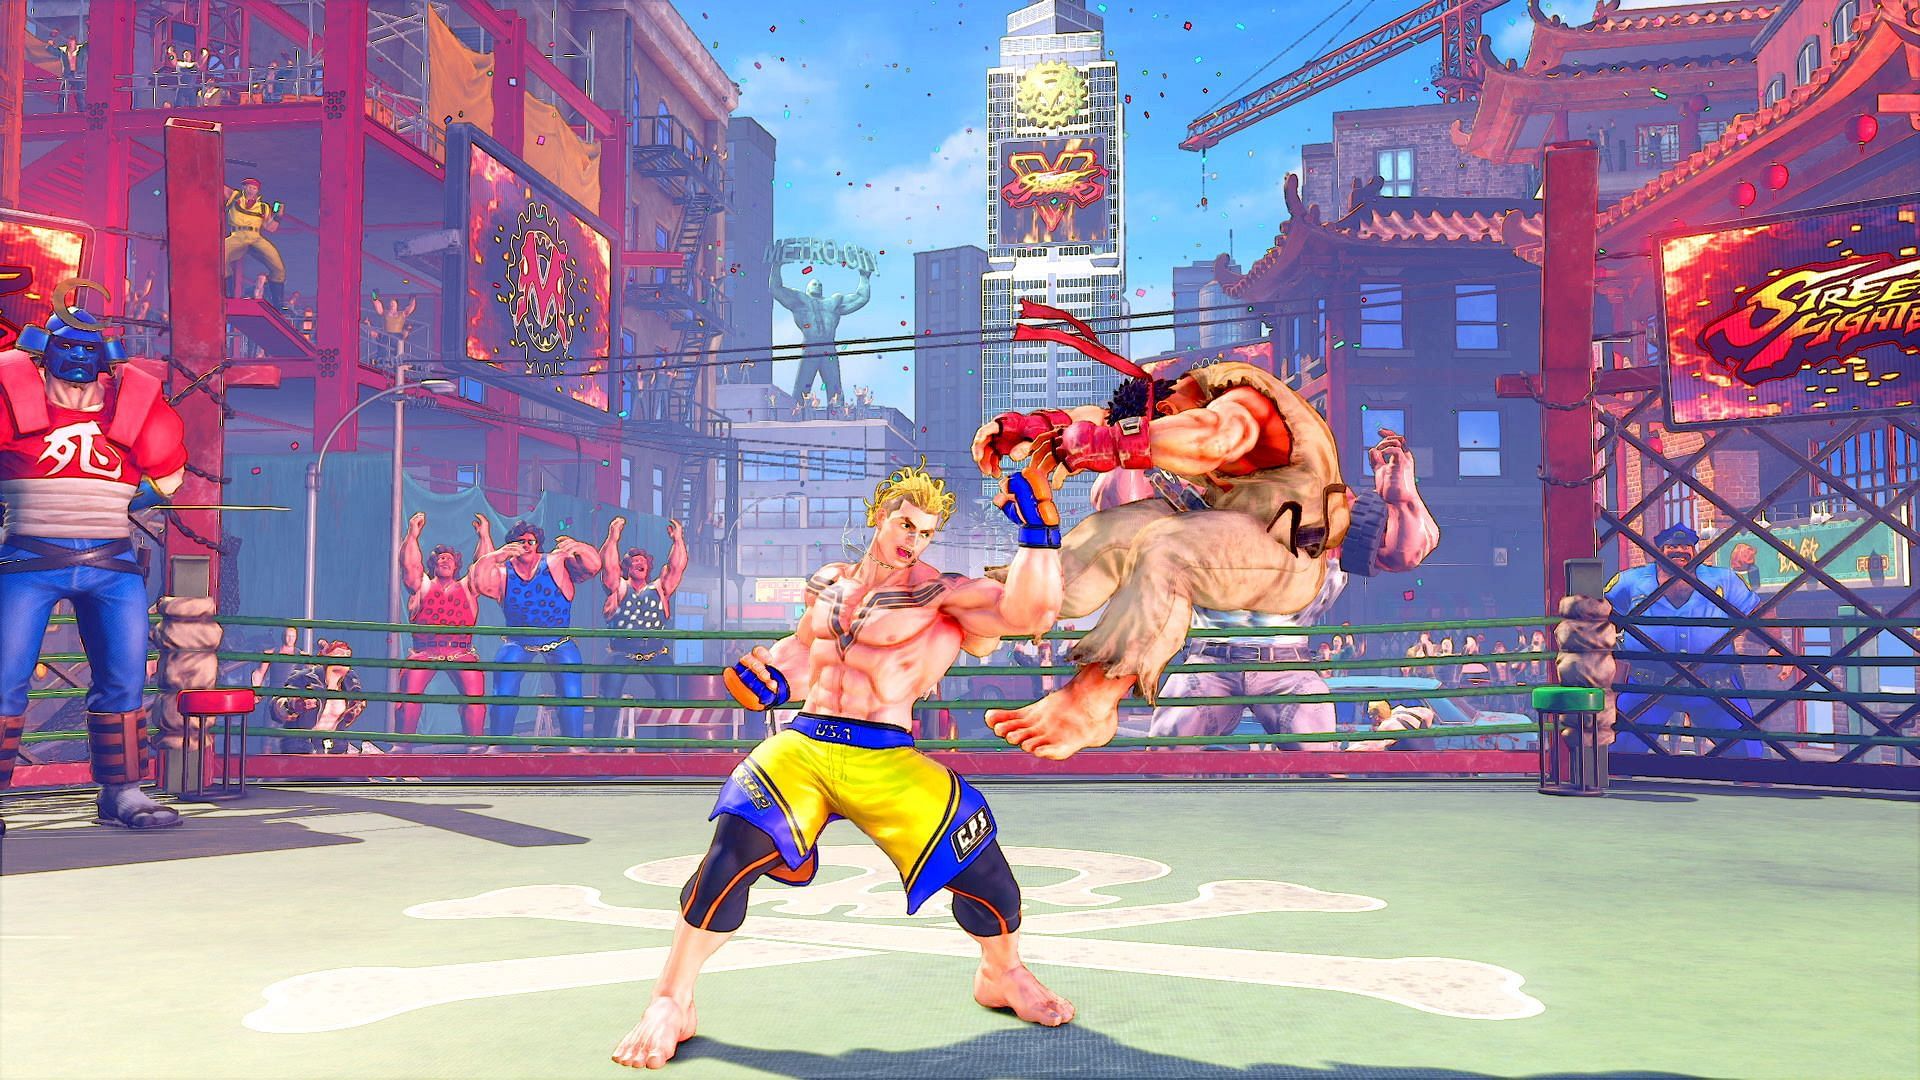 Capcom might announce upcoming Street Fighter when the timer ends on teaser website (Image via Capcom)